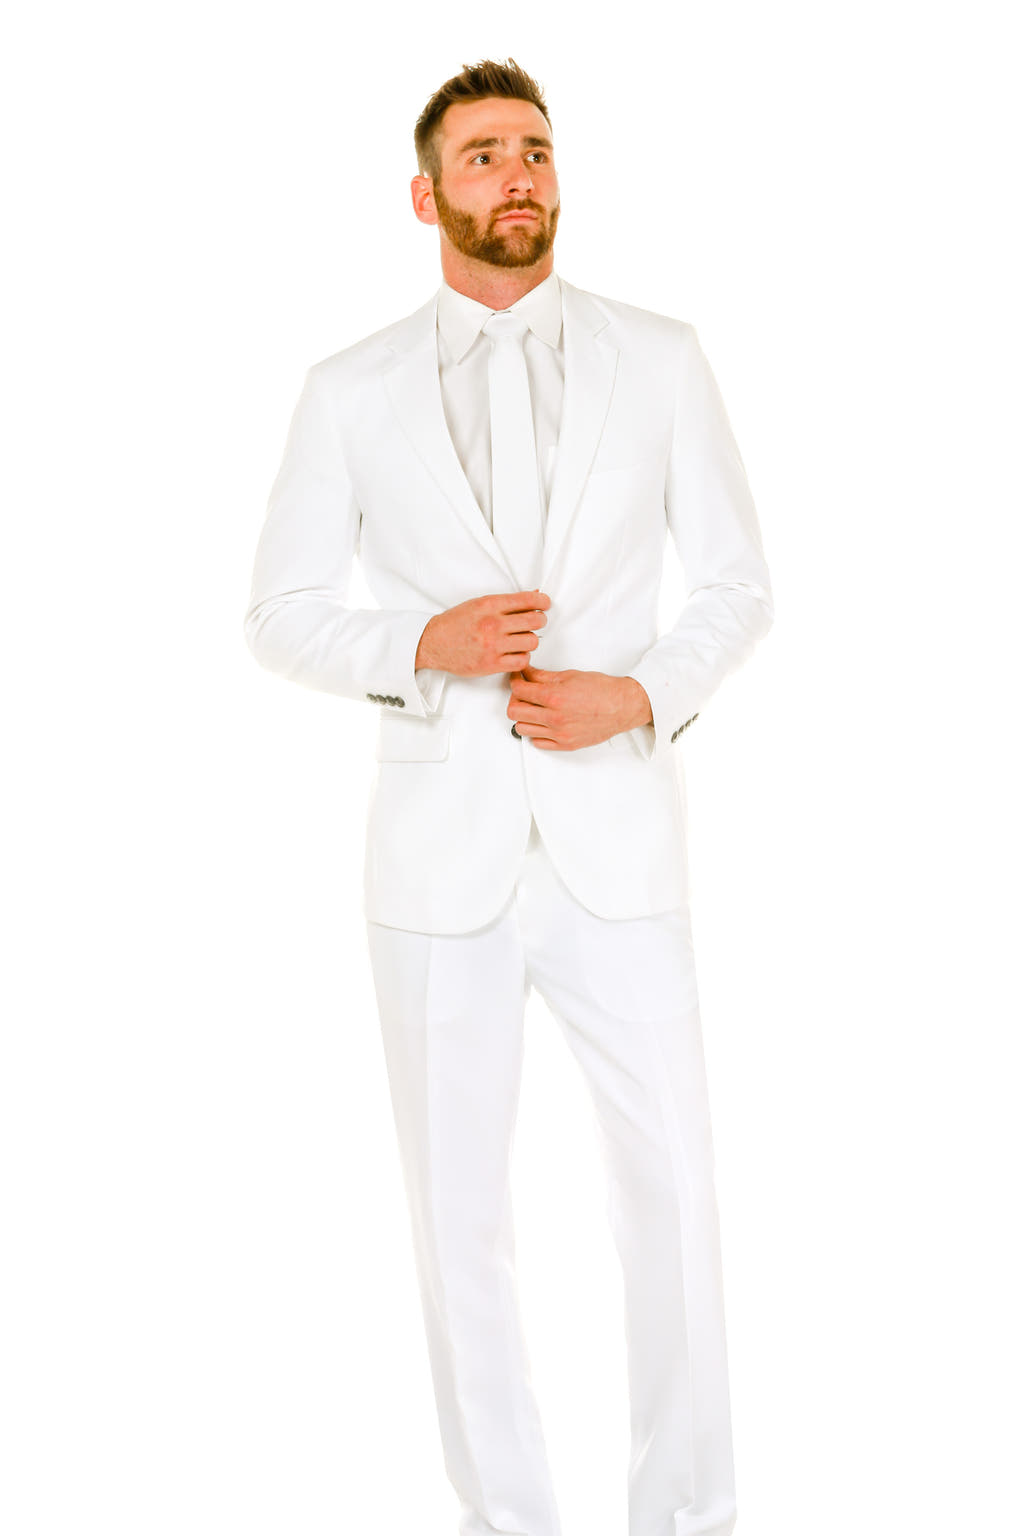 Men's White Suit by Shinesty